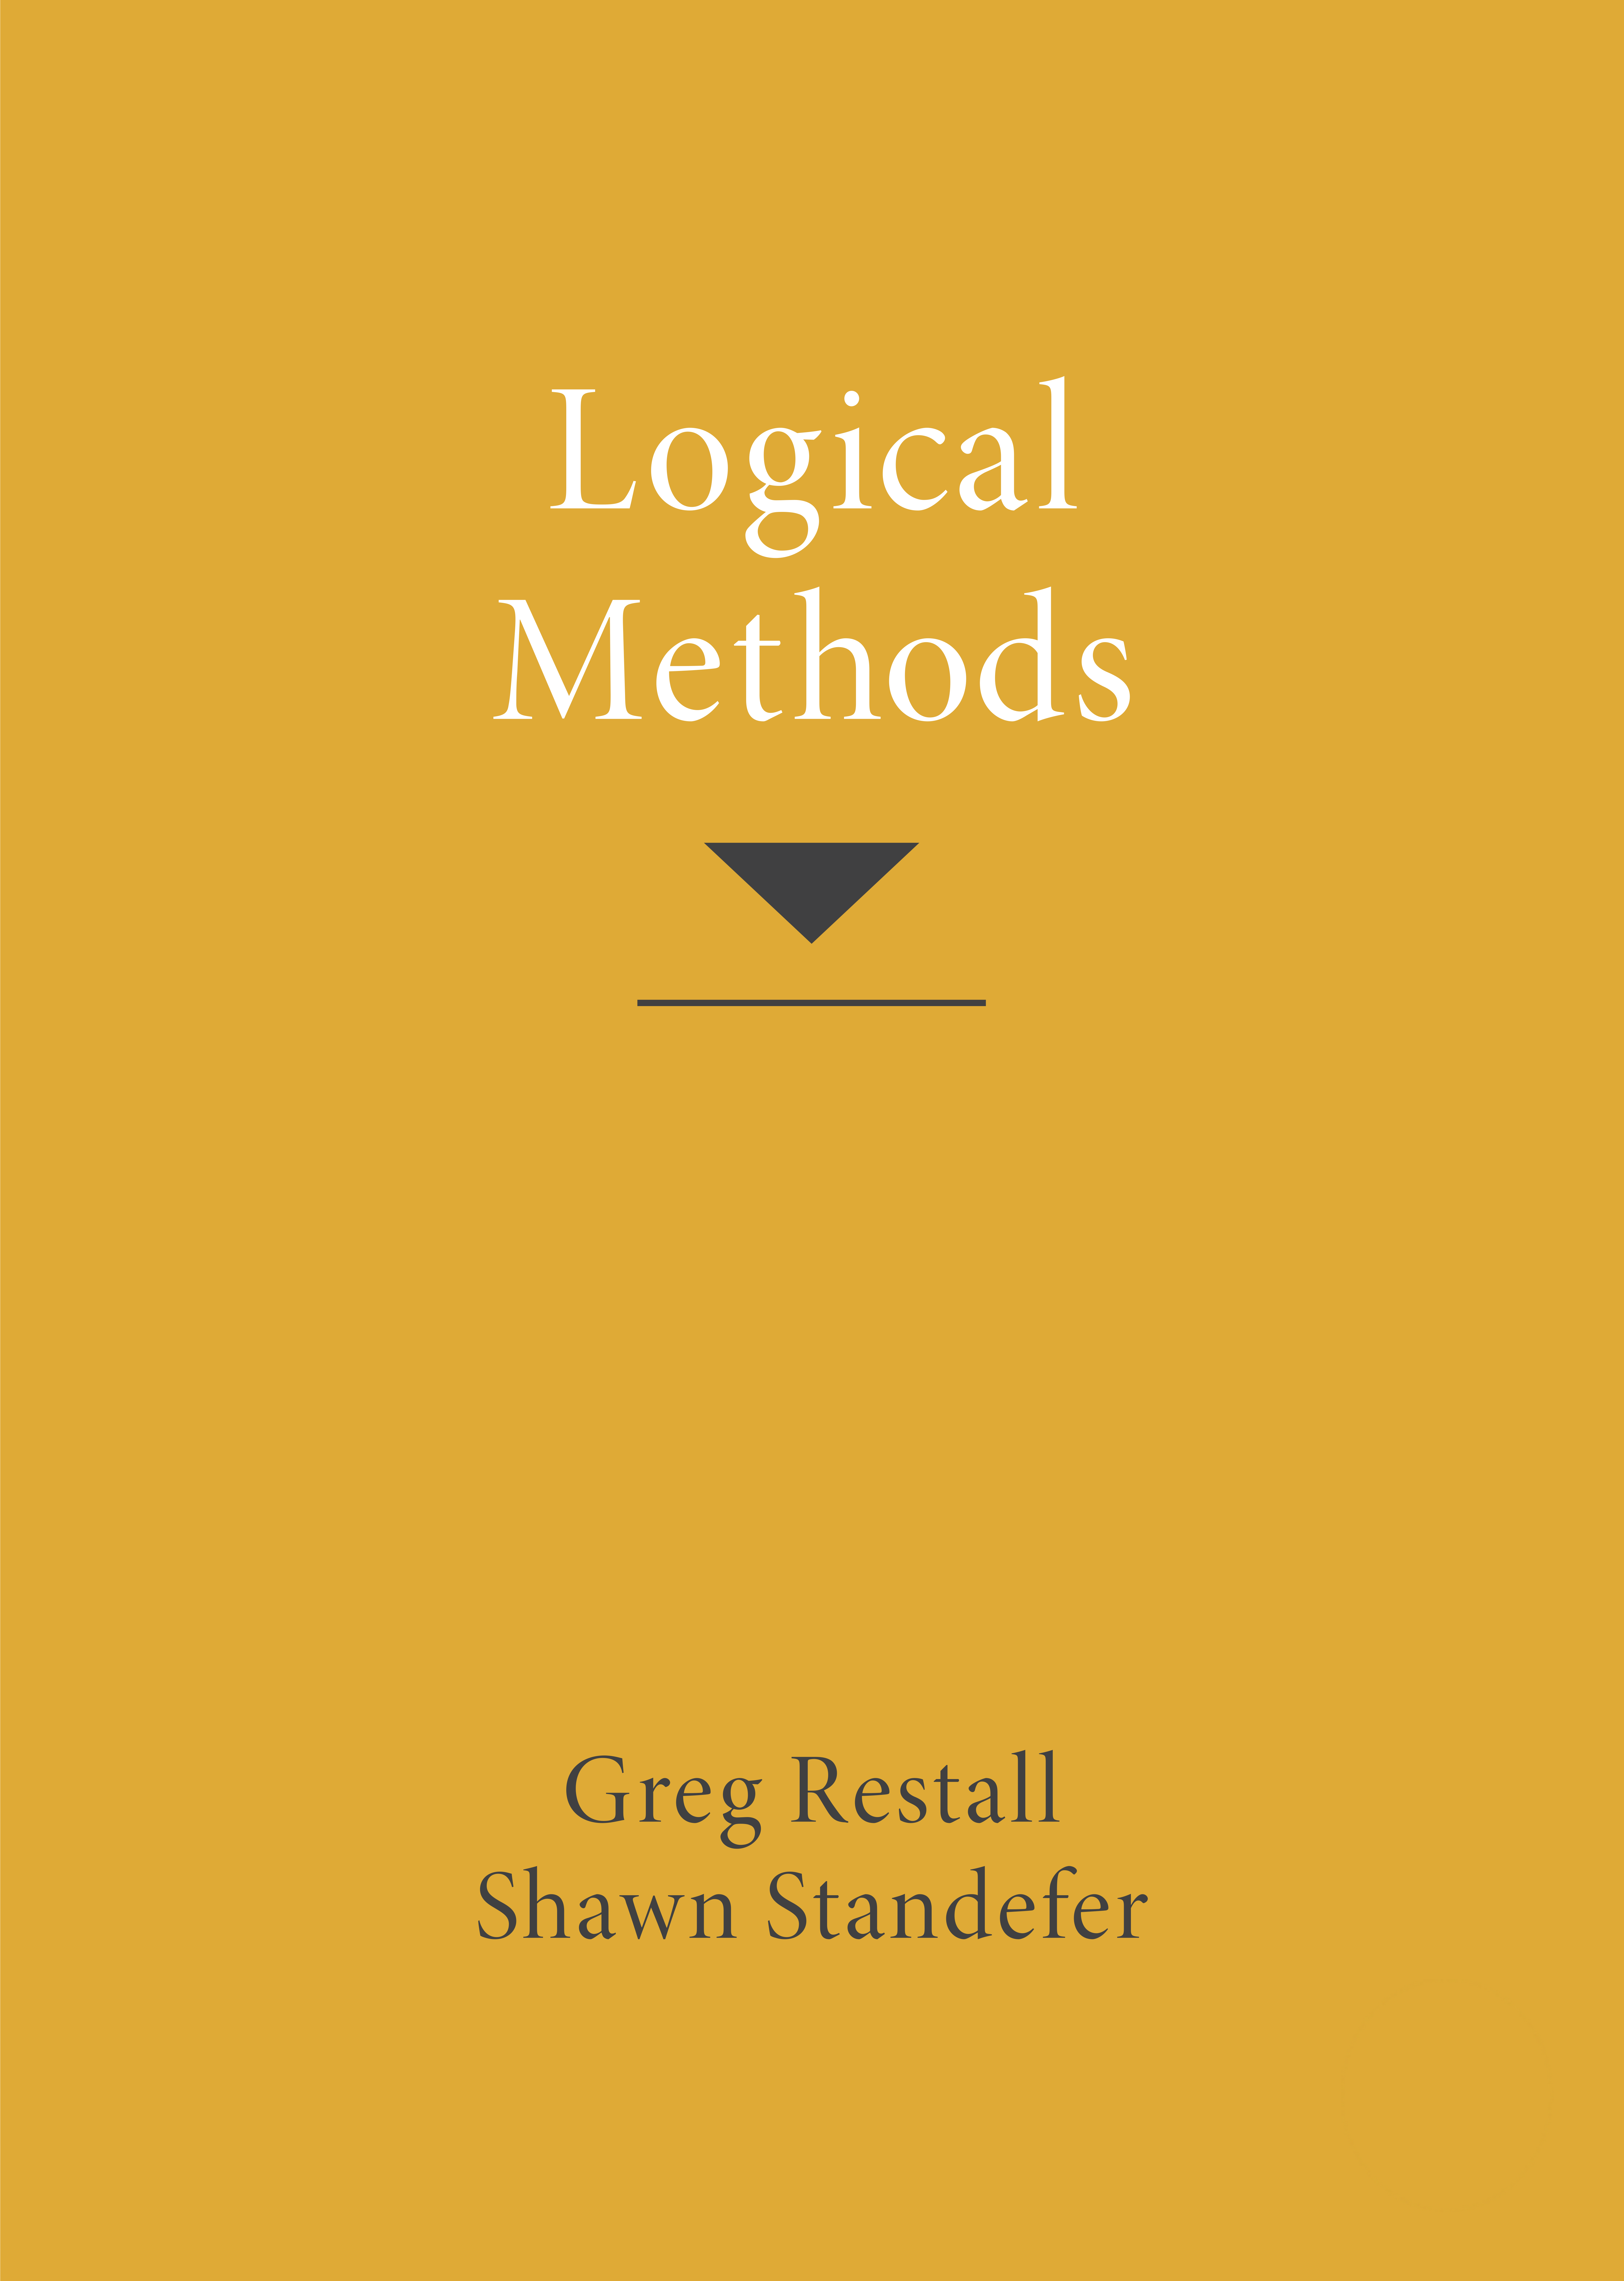 Cover Image of Logical Methods